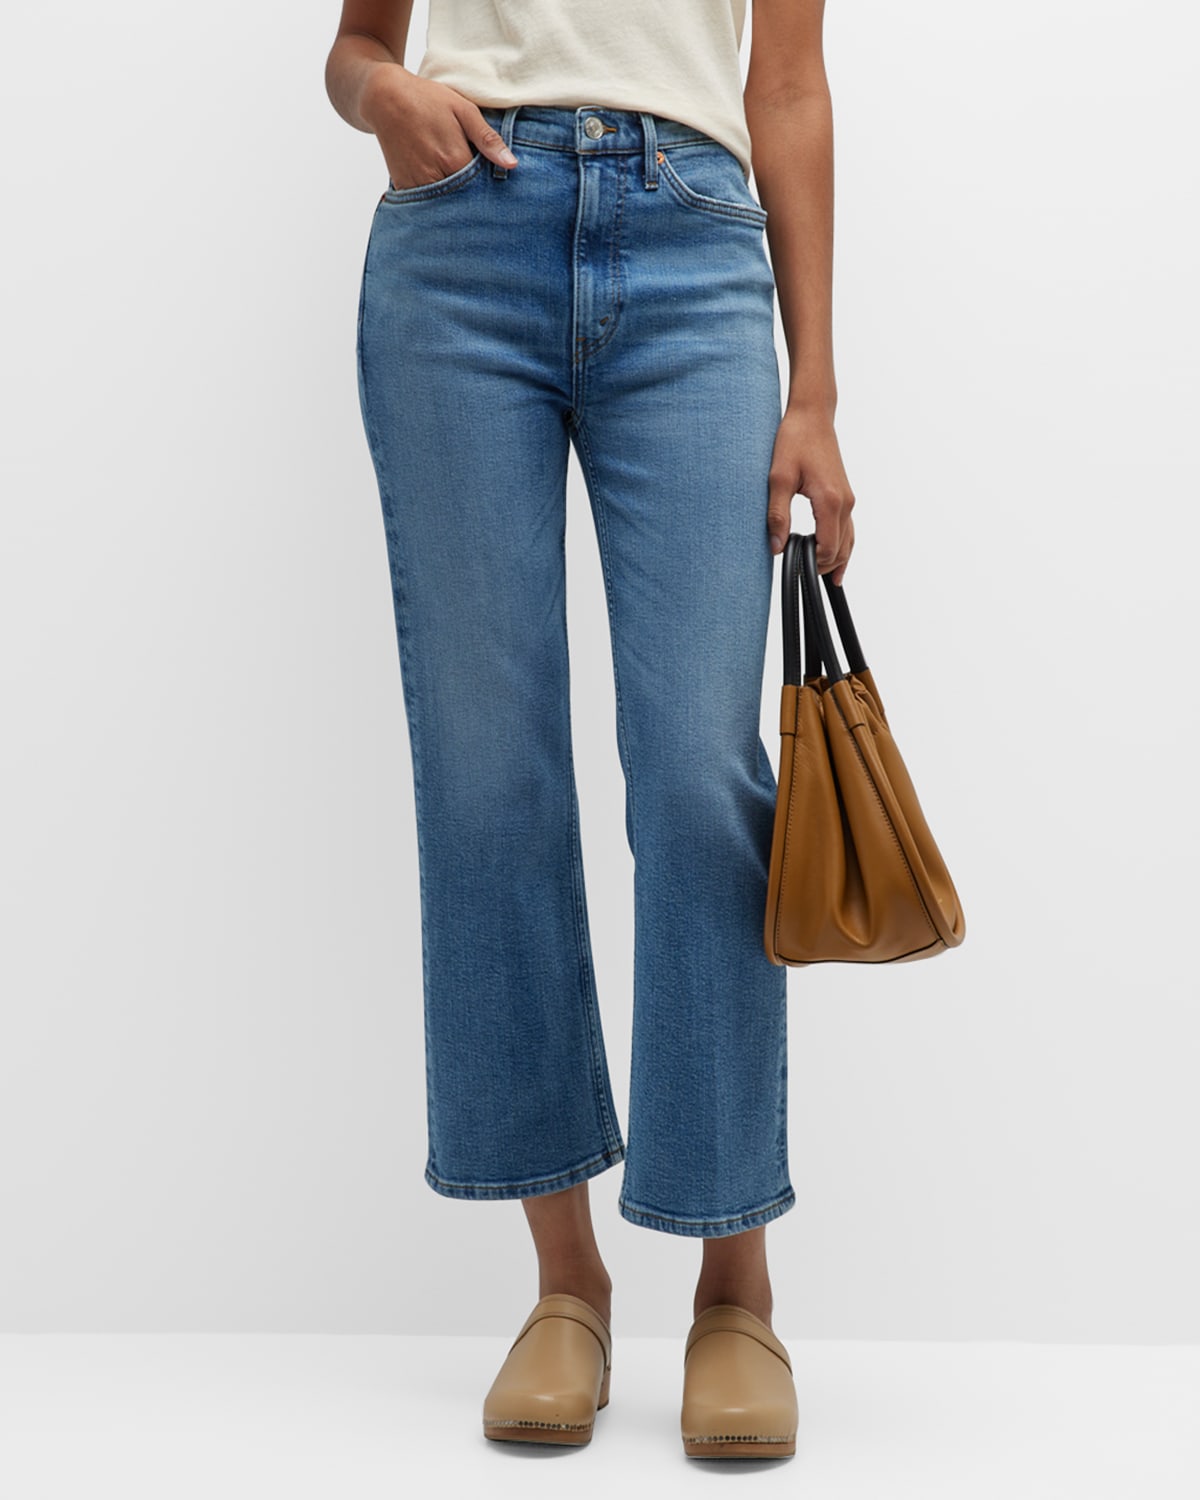 70s Crop Boot Jeans